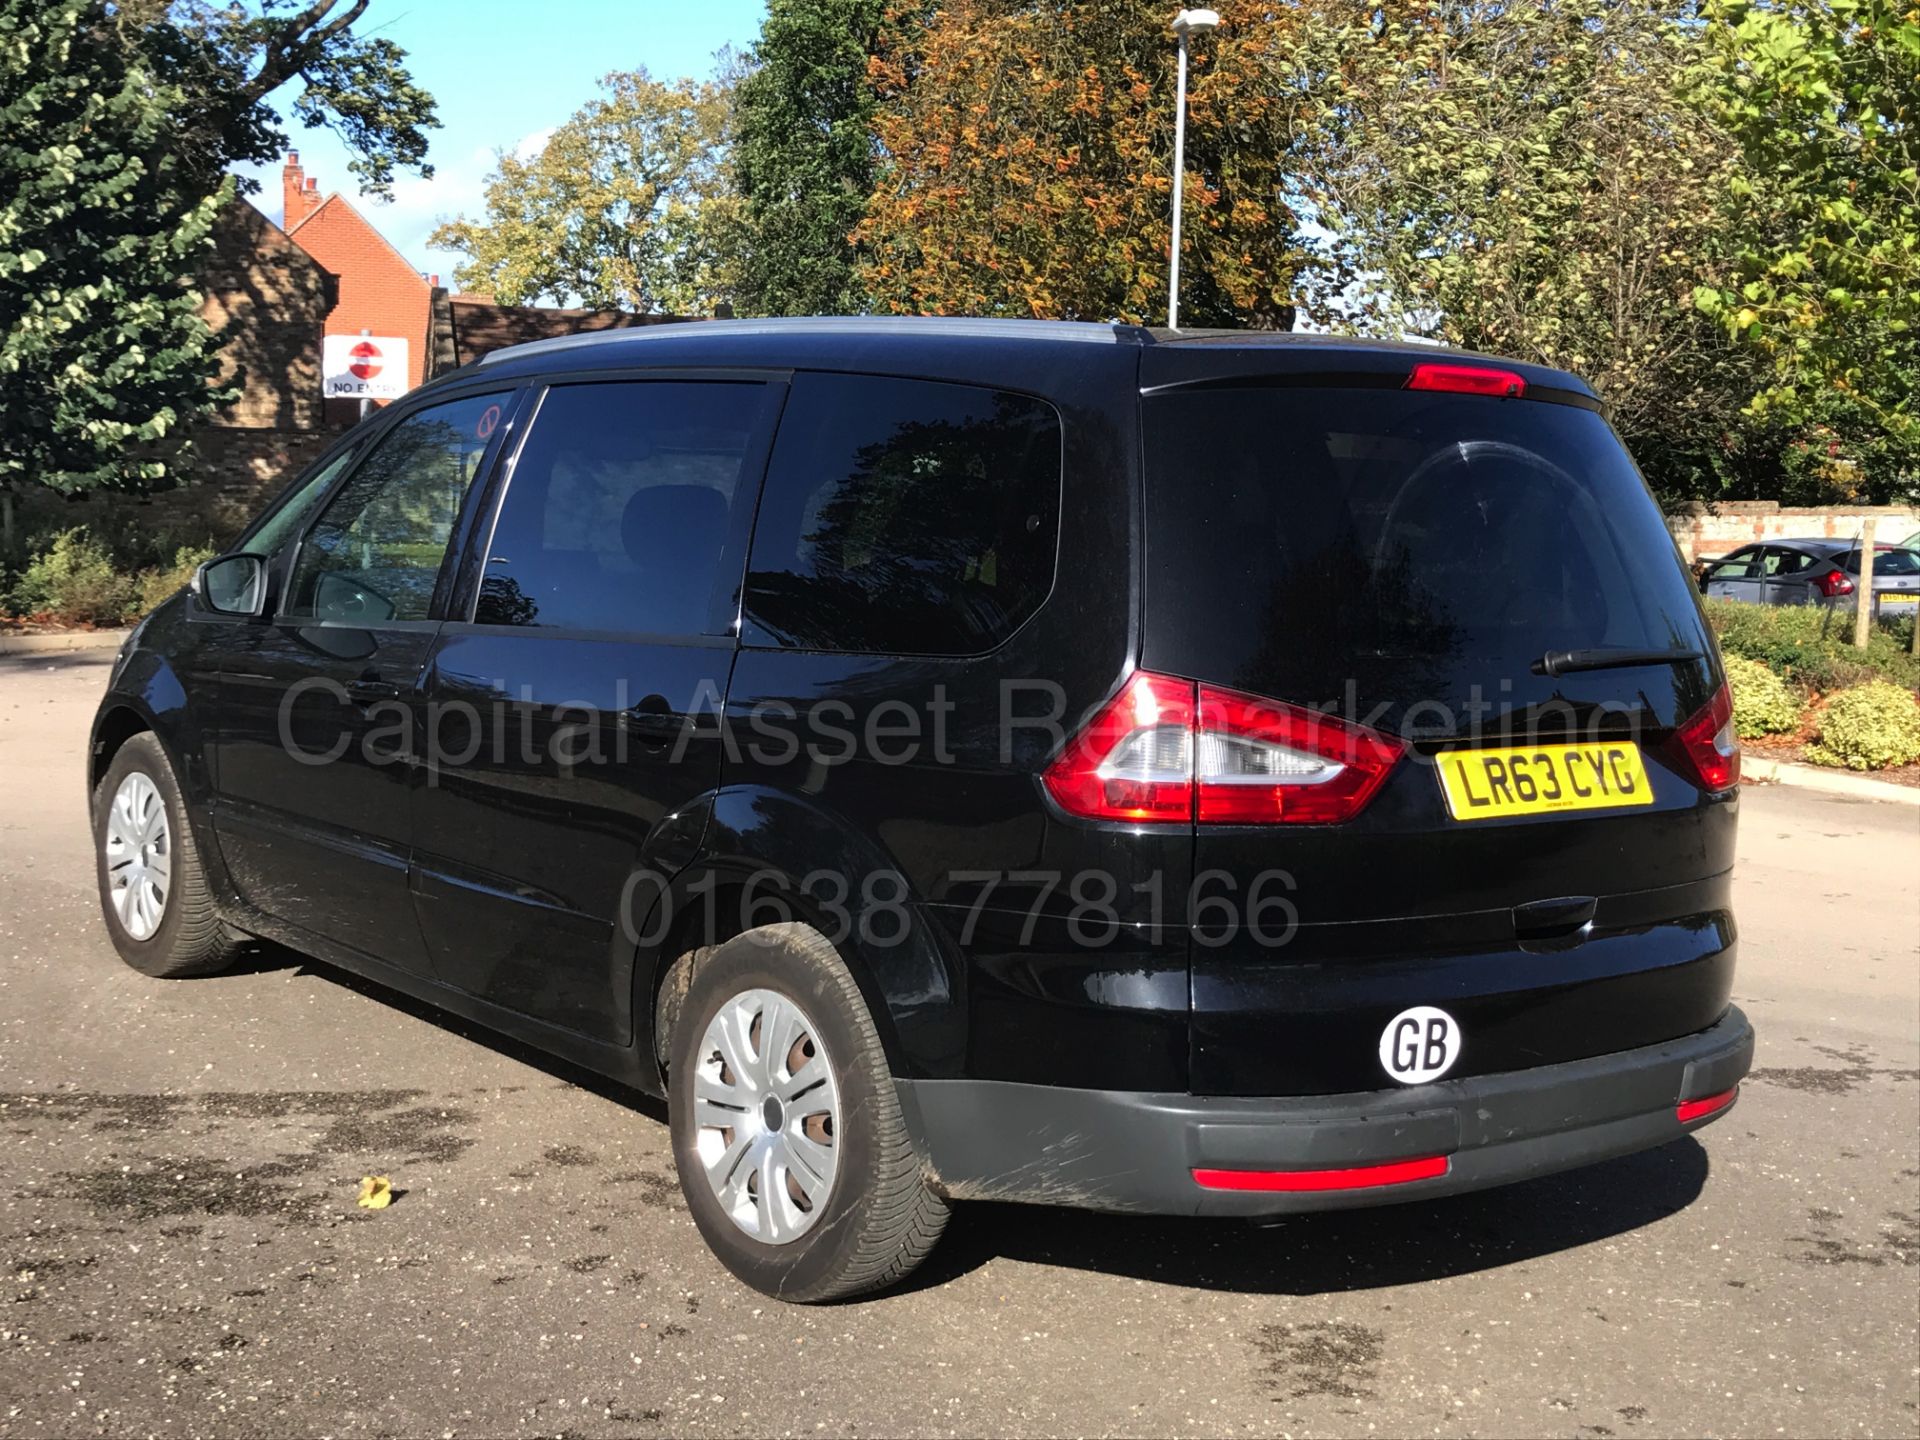 (ON SALE) FORD GALAXY 'ZETEC' 7 SEATER MPV (2014 MODEL) '2.0 TDCI -140 BHP' (1 OWNER) *FULL HISTORY* - Image 4 of 28